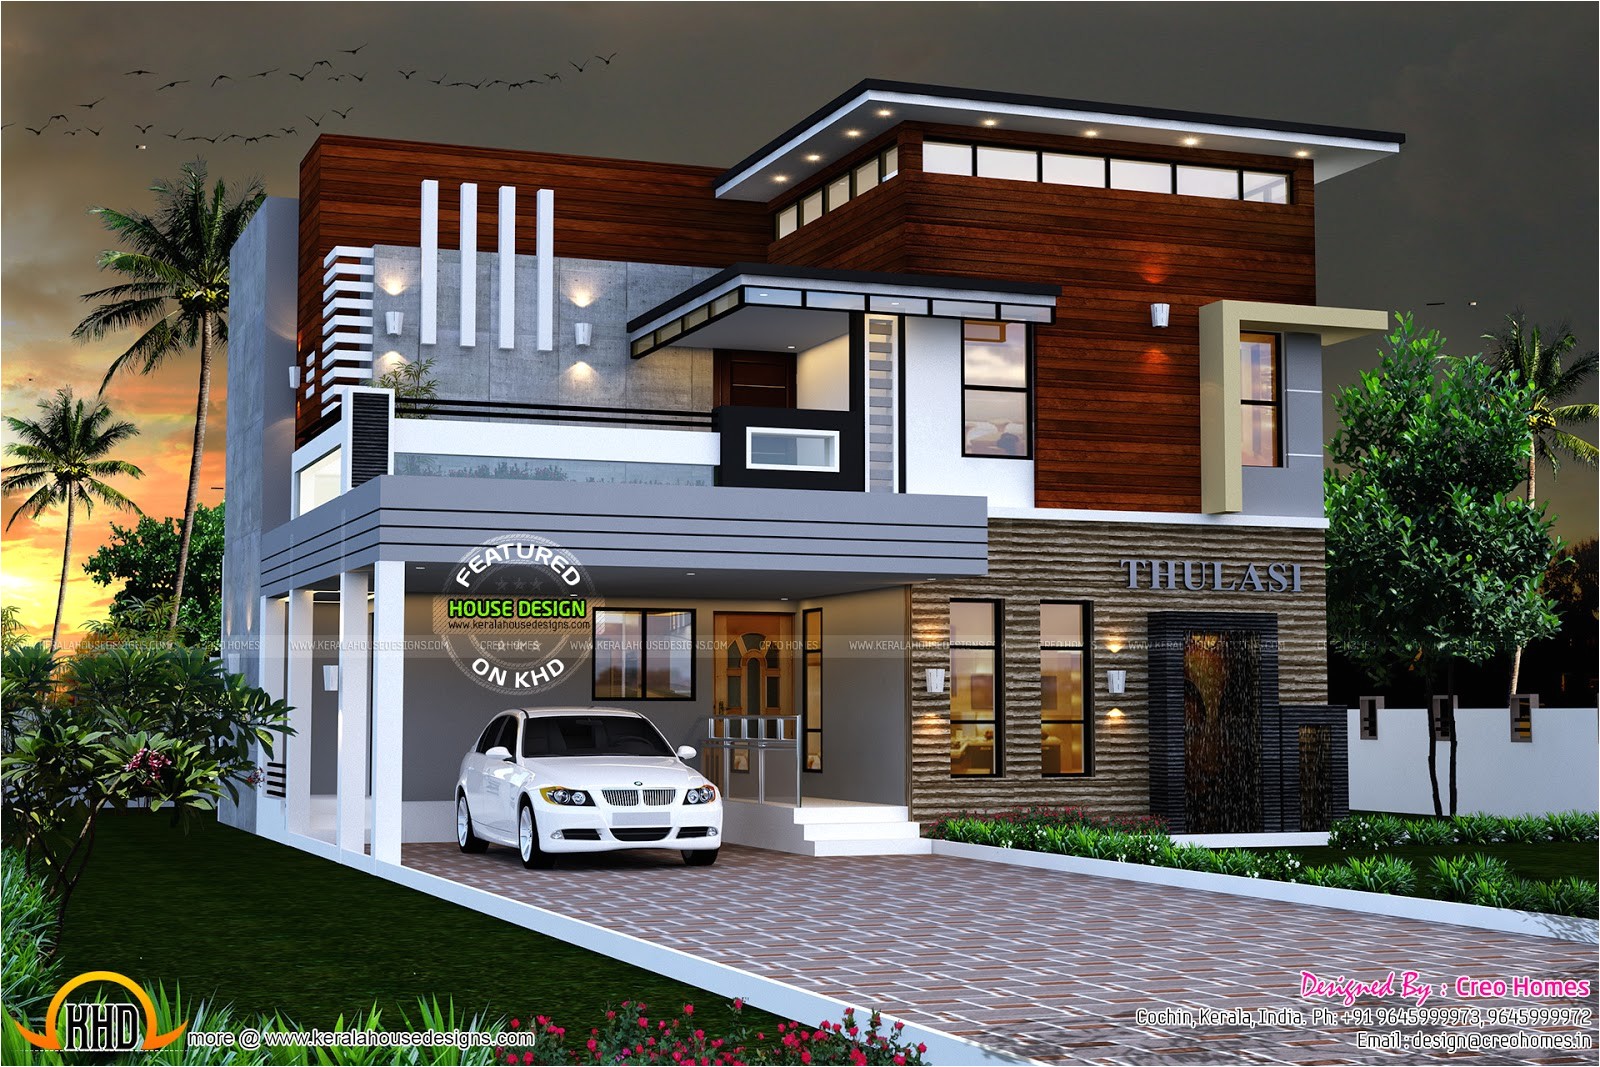 Contemporary Home Plans Kerala All About Design Sq Ft Modern Contemporary House